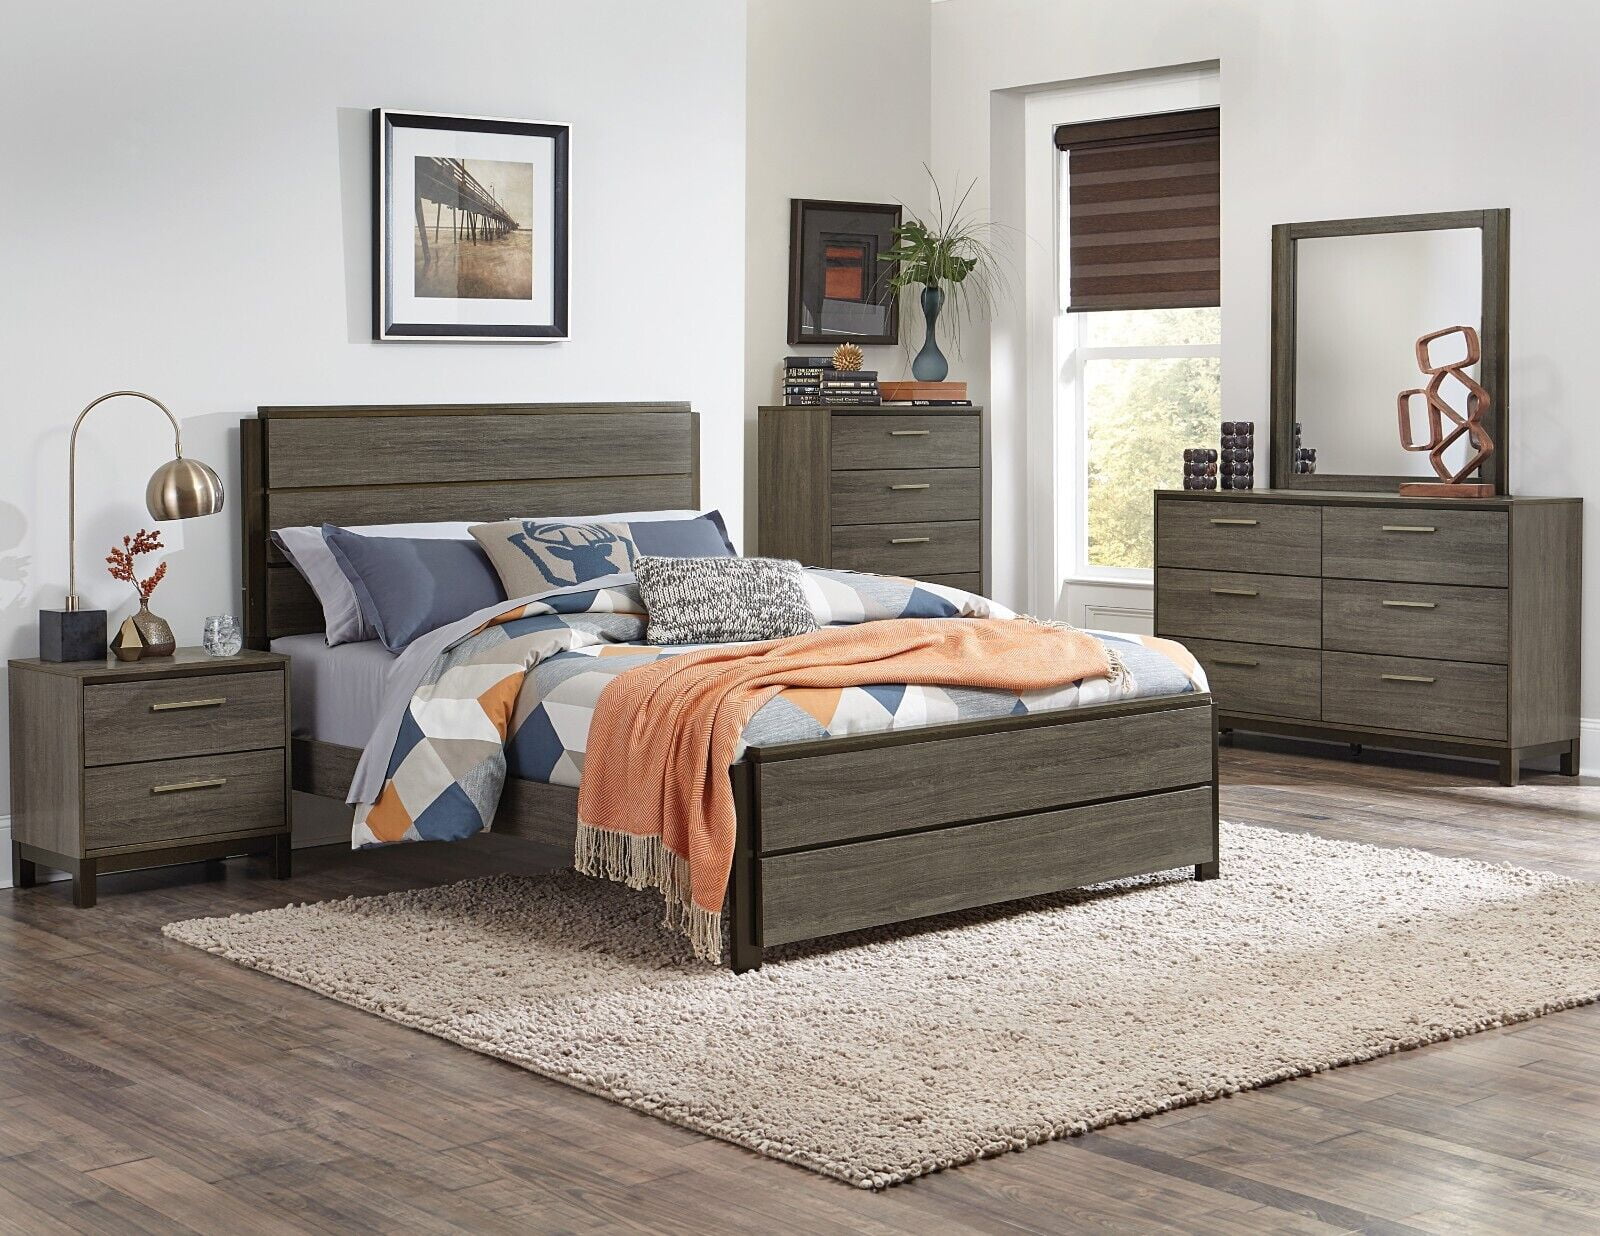 contemporary style cal king bedroom set 5pc nightstand dresser